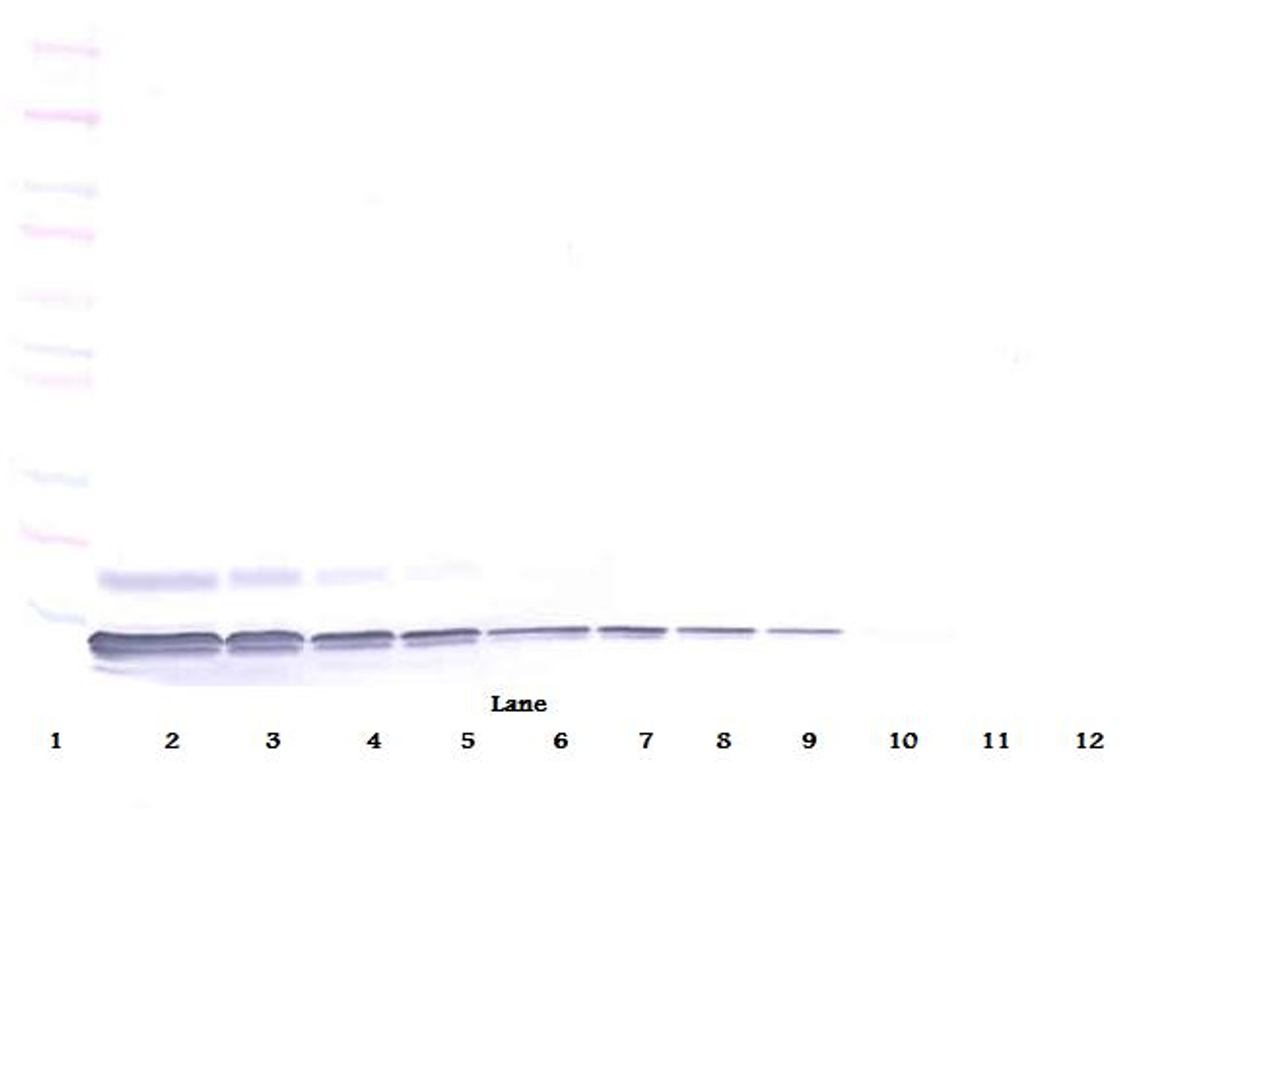 To detect Human SDF-1-alpha by Western Blot analysis this antibody can be used at a concentration of 0.1 - 0.2 ug/ml. When used in conjunction with compatible secondary reagents, the detection limit for recombinant Human SDF-1-alpha is 1.5 - 3.0 ng/lane, under either reducing or non-reducing conditions.